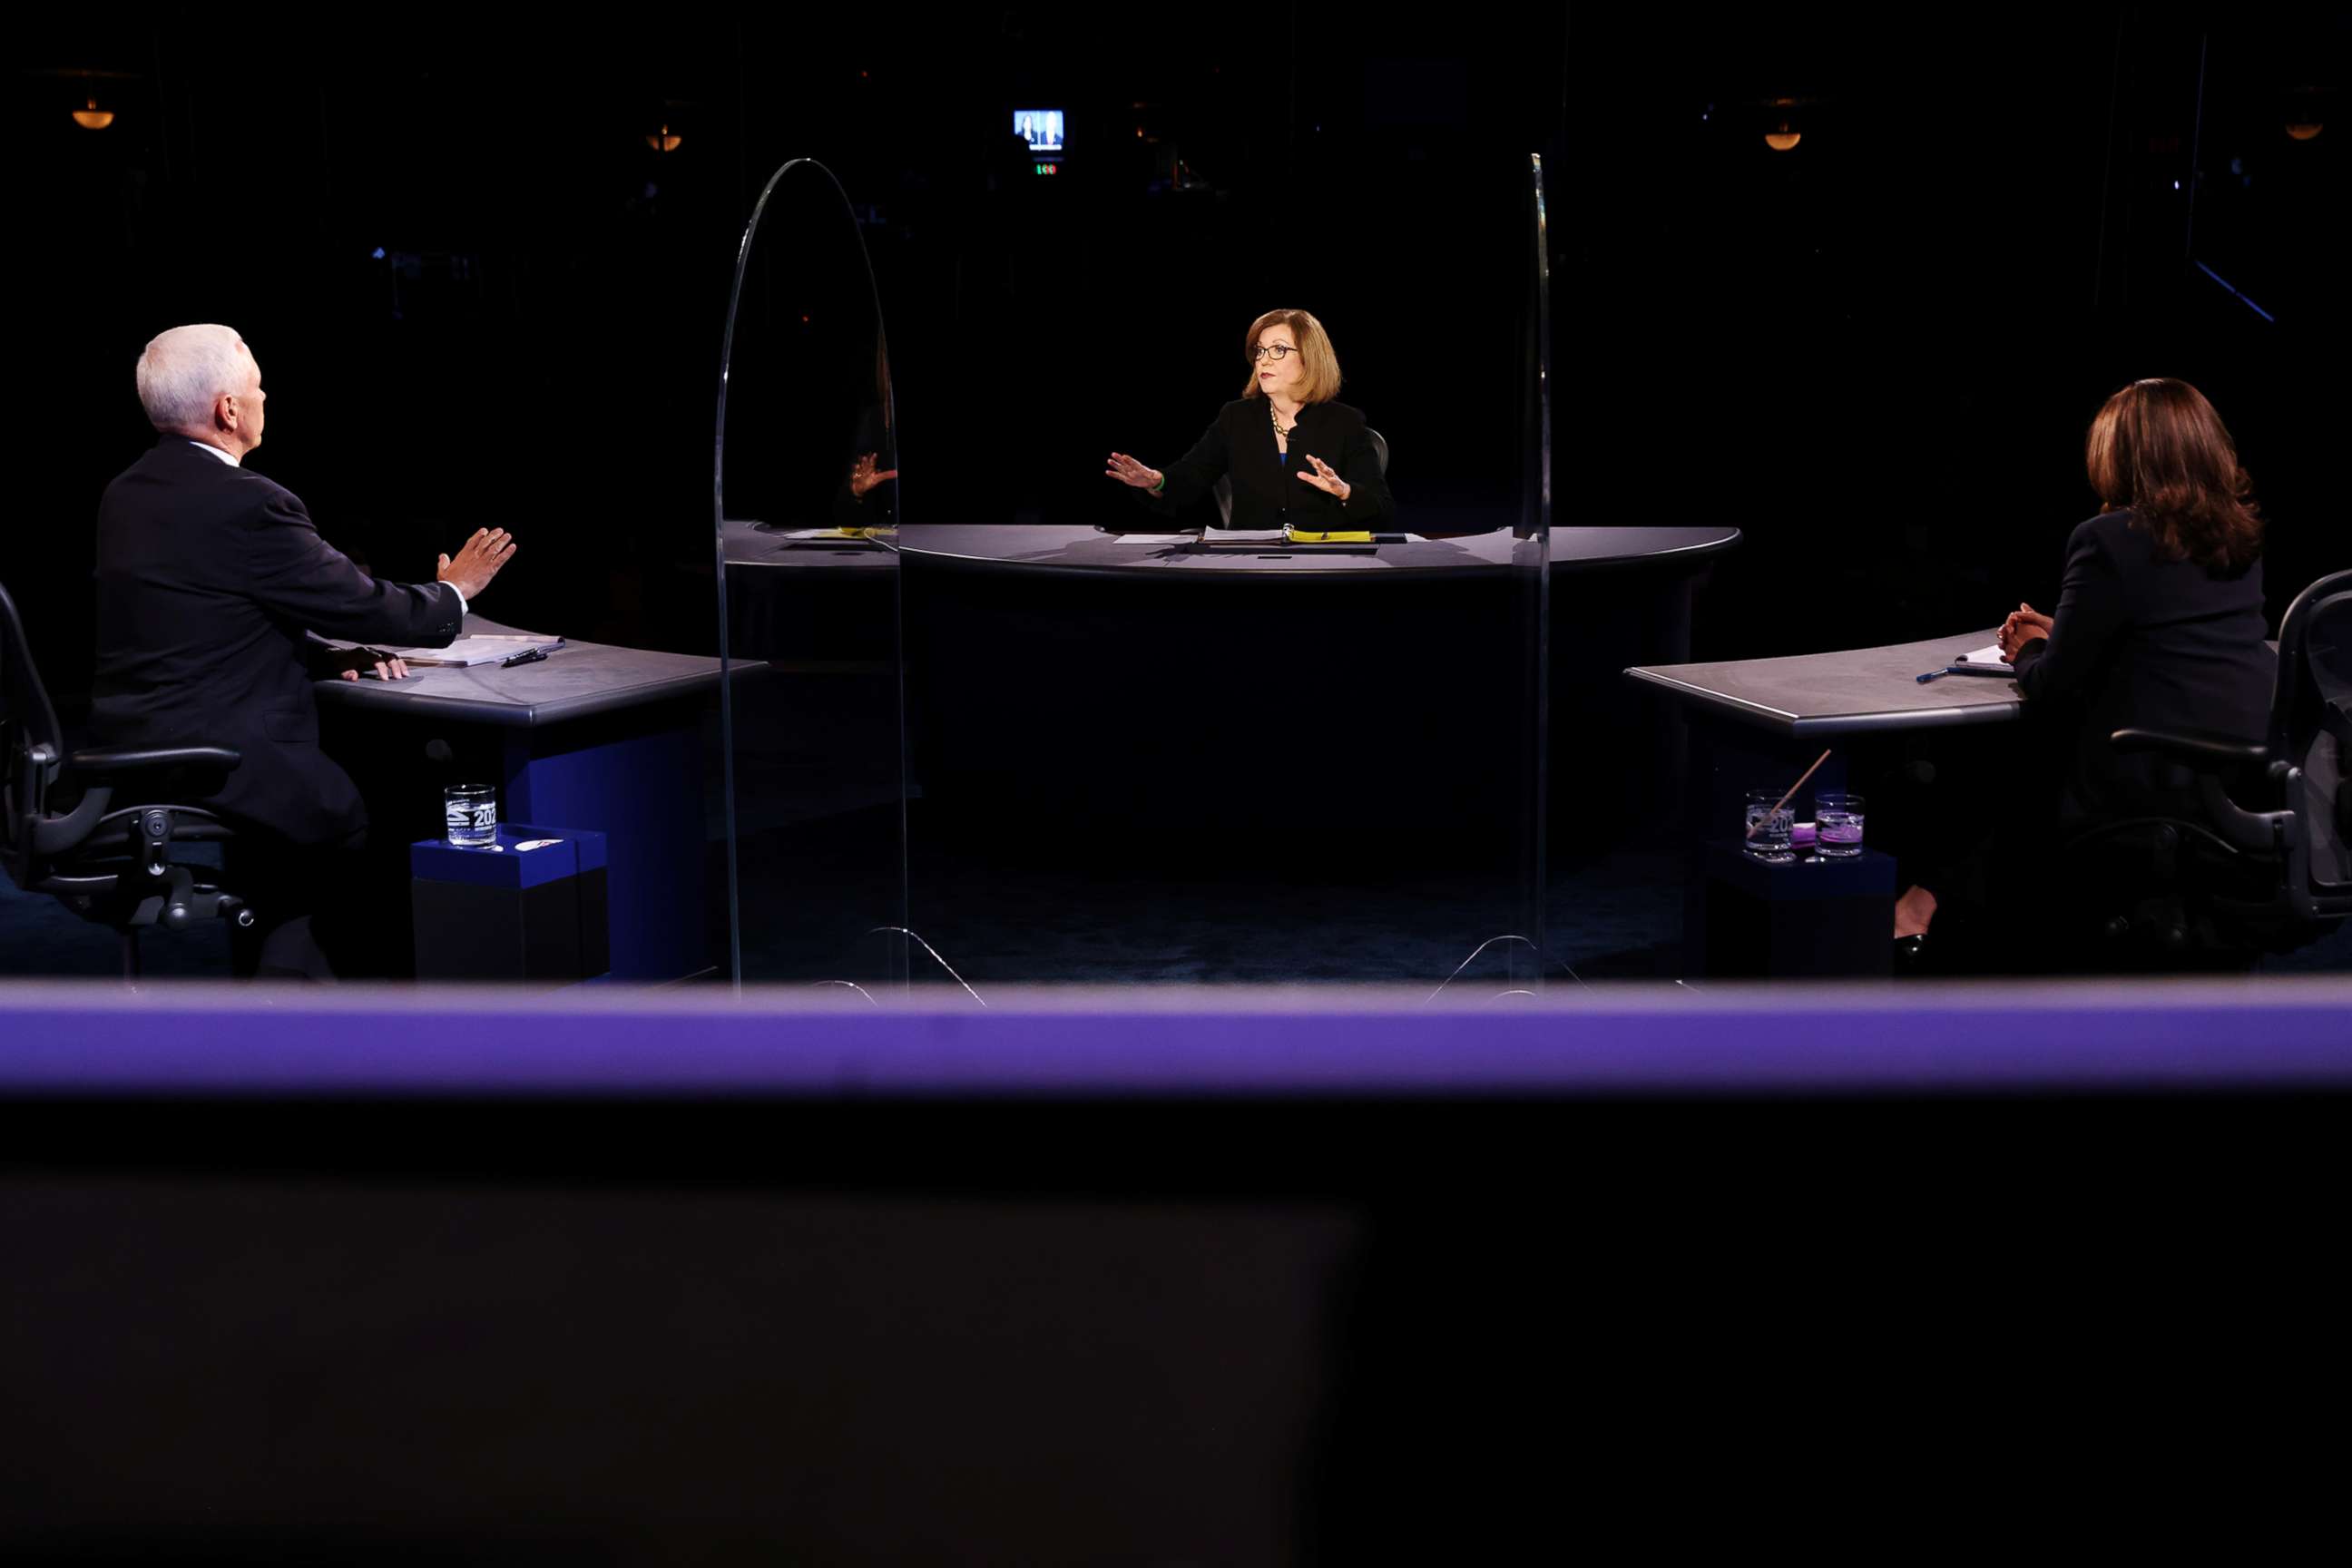 PHOTO: Vice President Mike Pence and Democratic vice presidential nominee Senator Kamala Harris take part in the 2020 vice presidential debate moderated by Susan Page of USA Today, in Salt Lake City, Oct. 7, 2020.